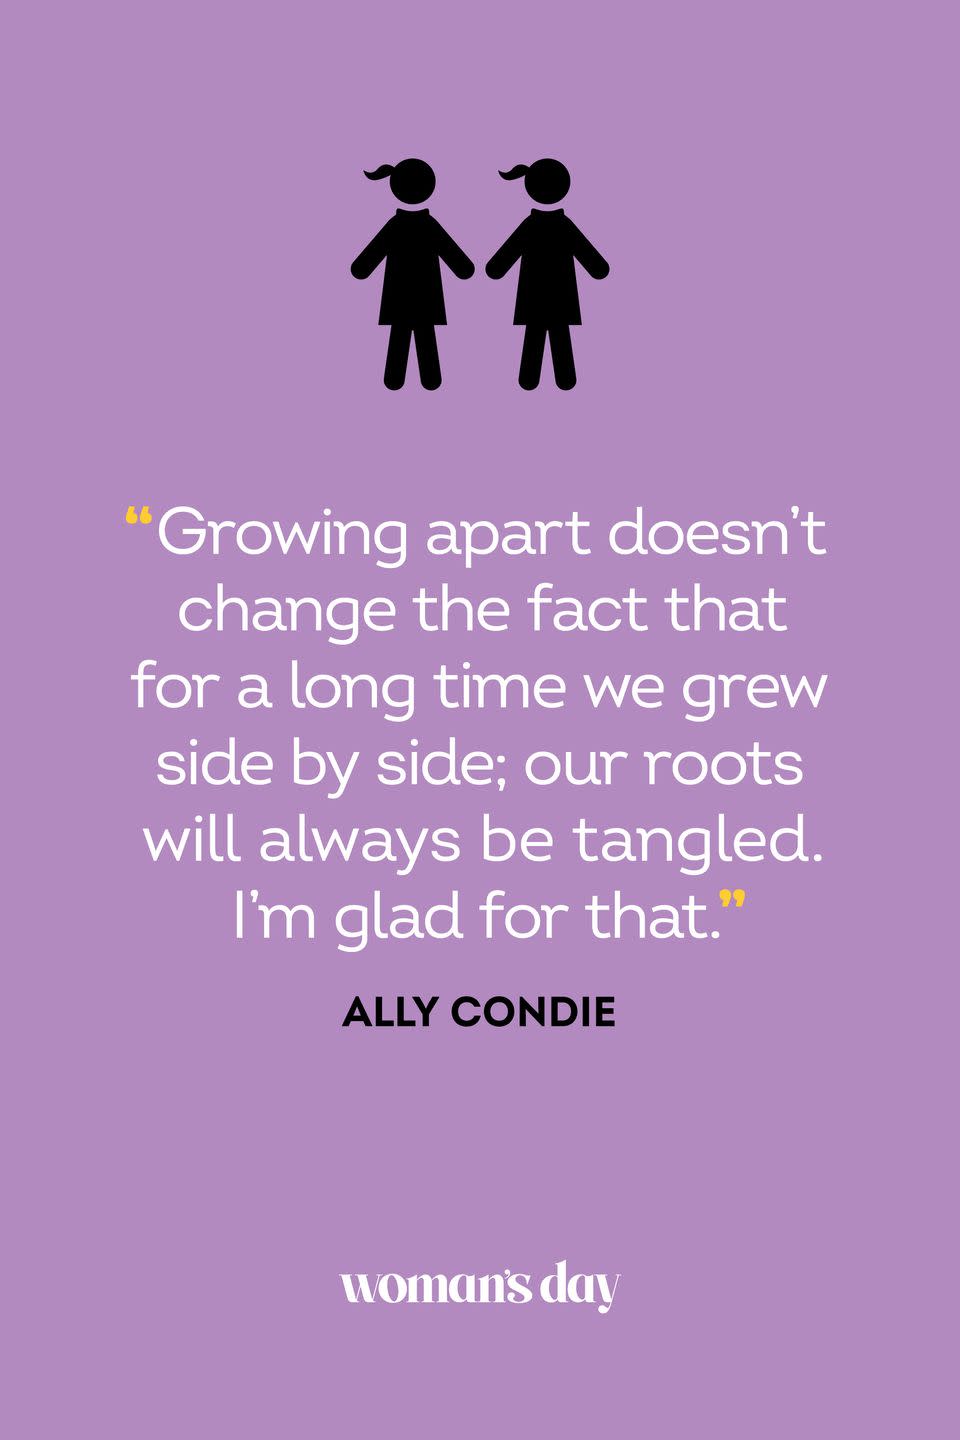 <p> “Growing apart doesn’t change the fact that for a long time we grew side by side; our roots will always be tangled. I’m glad for that.”</p>